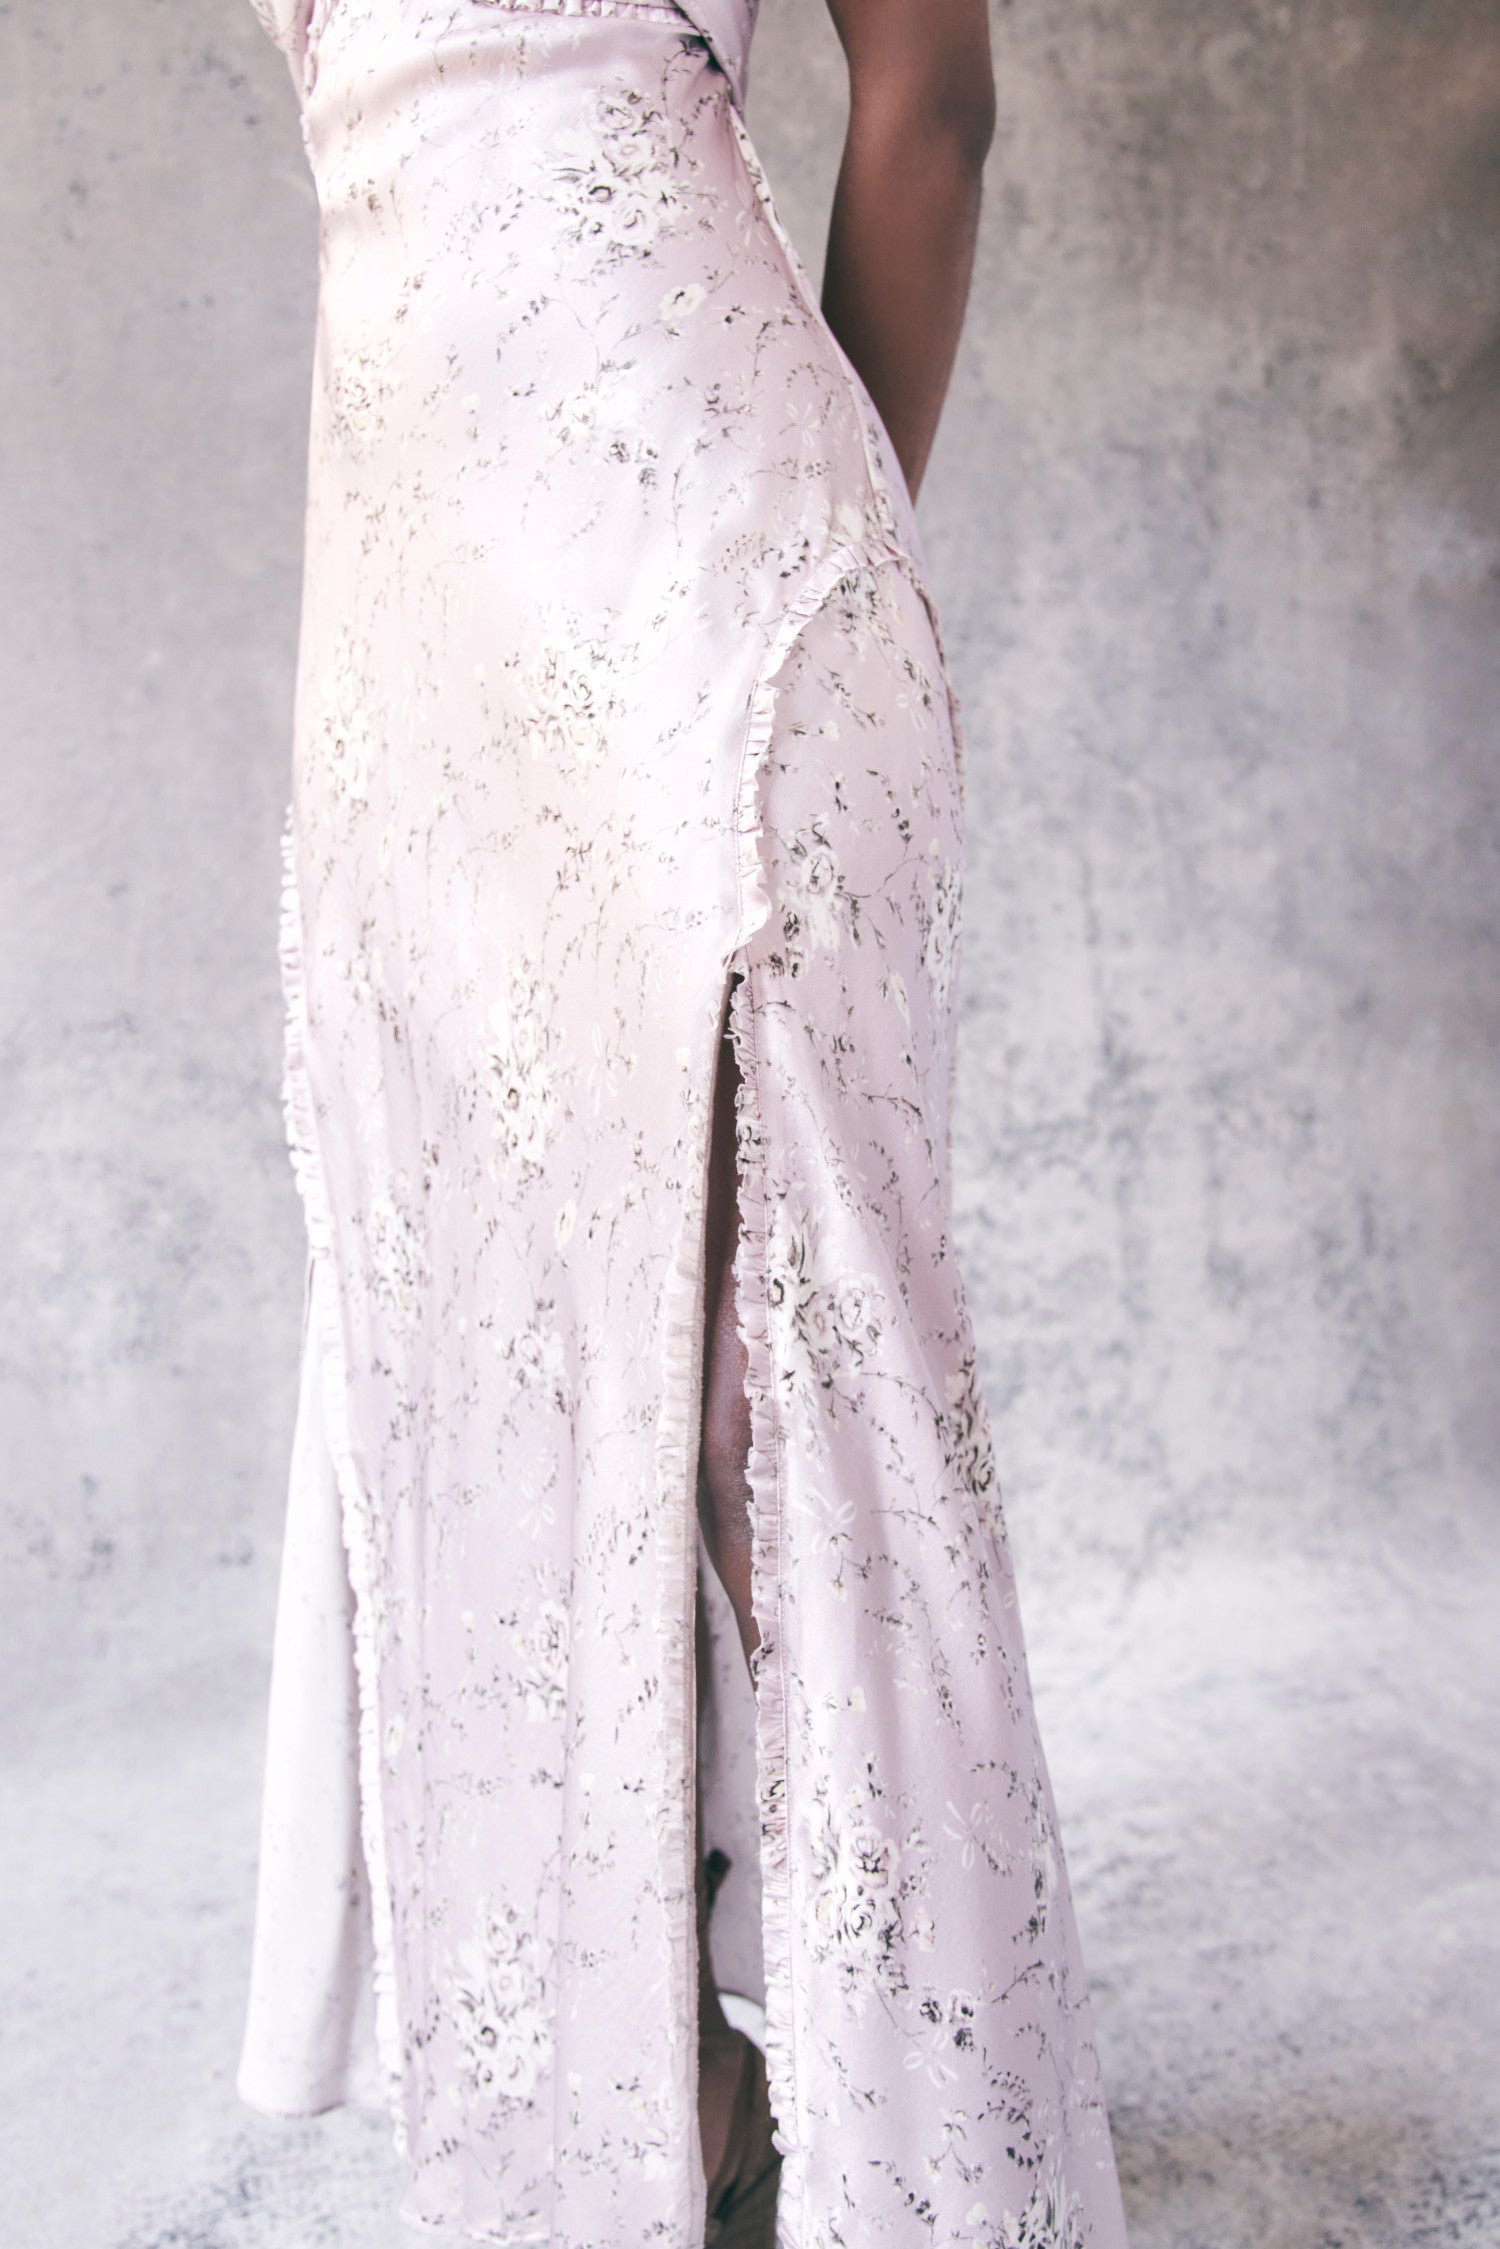 Close up image detailing ruffle trim and pattern on light pink floral maxi dress